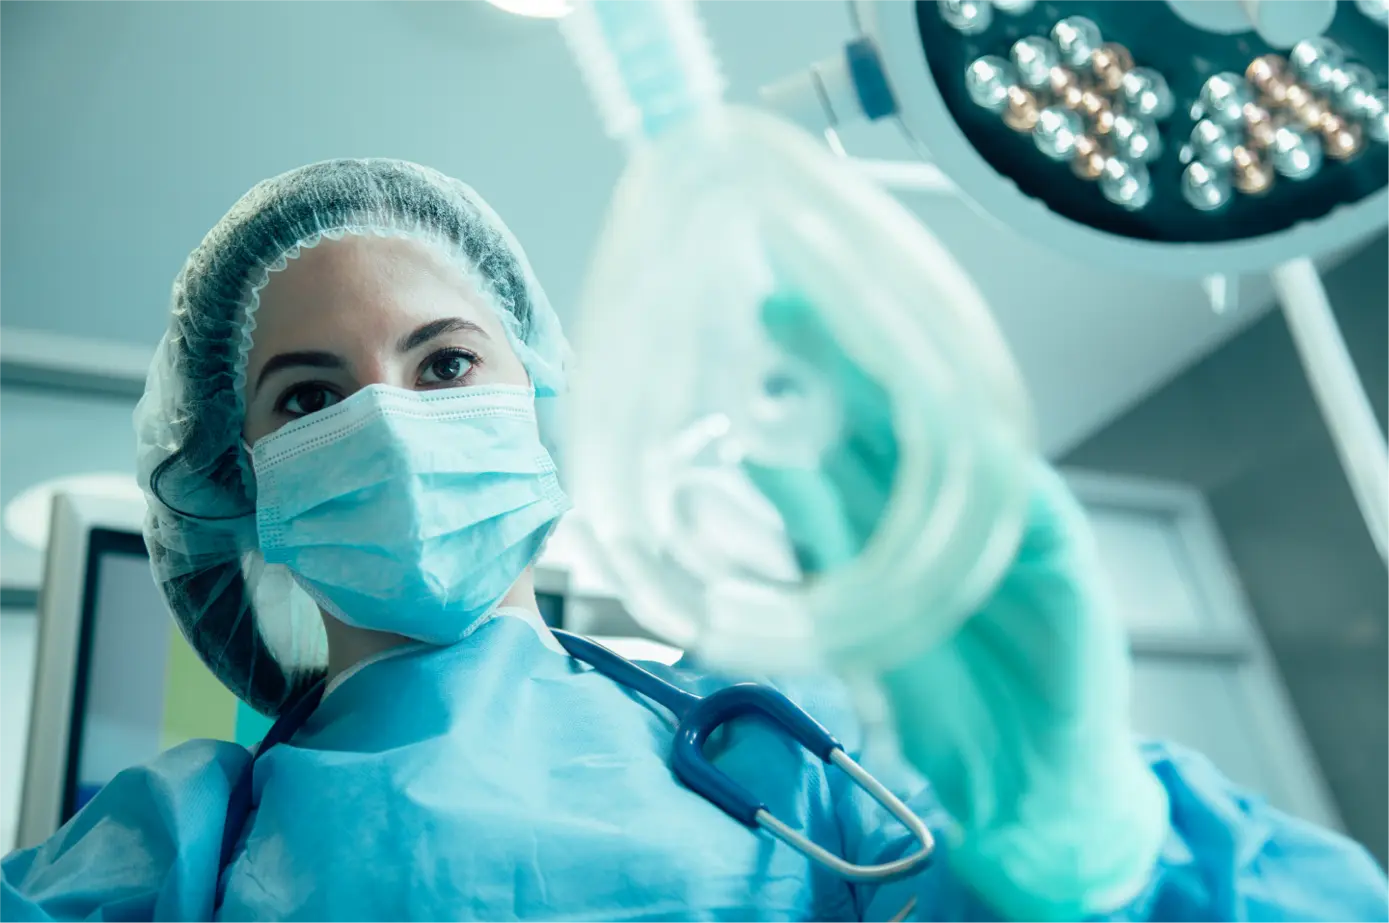 Female surgeon putting a mask on her patient